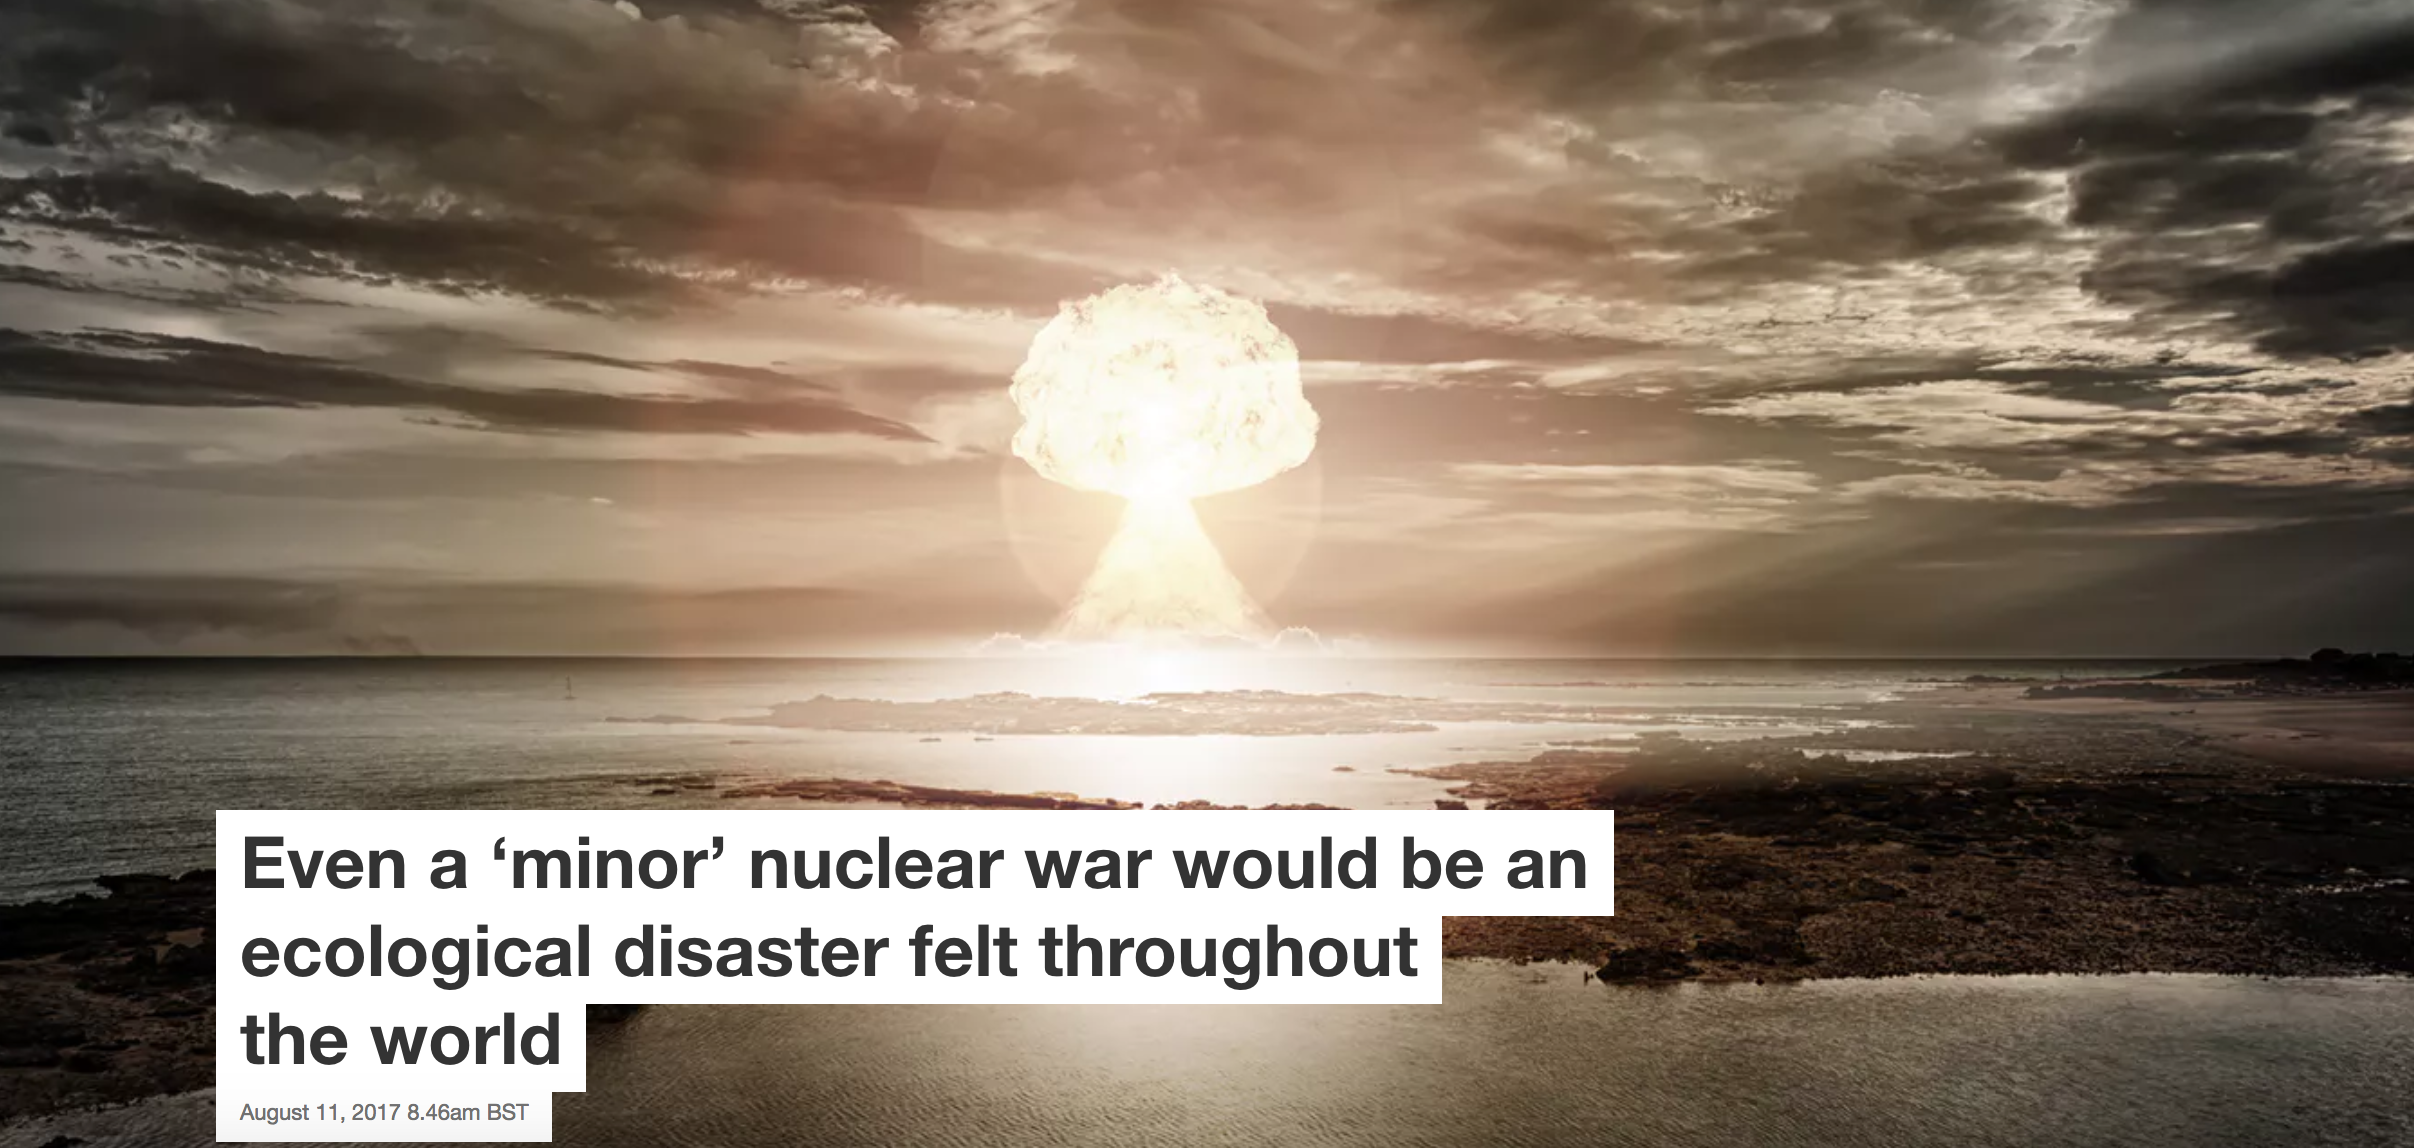 Even a ‘minor’ nuclear war would be an ecological disaster felt throughout the world